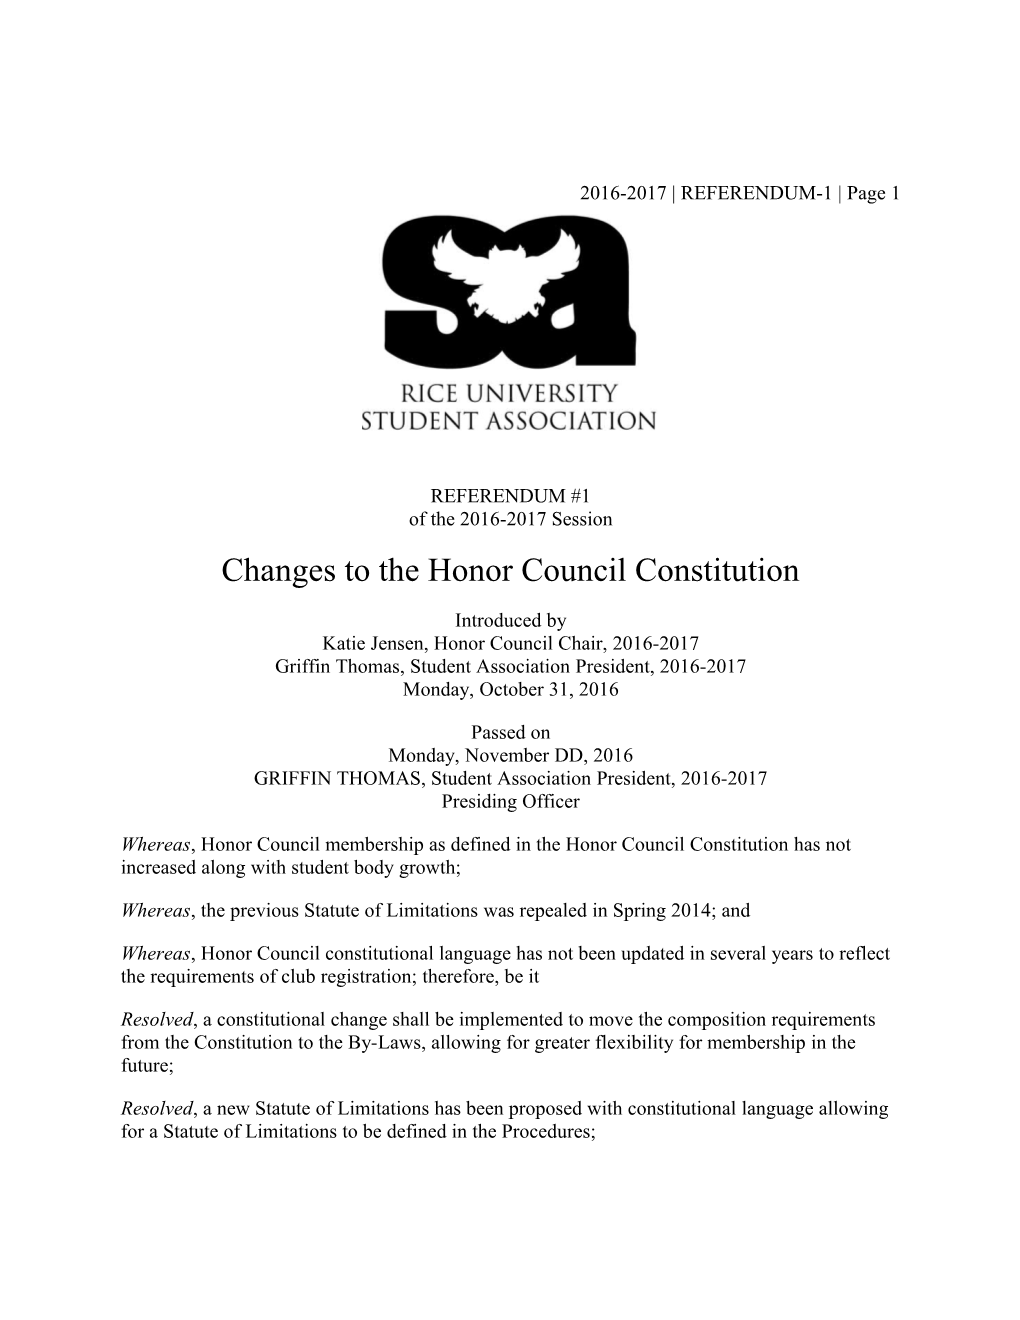 Changes to the Honor Council Constitution